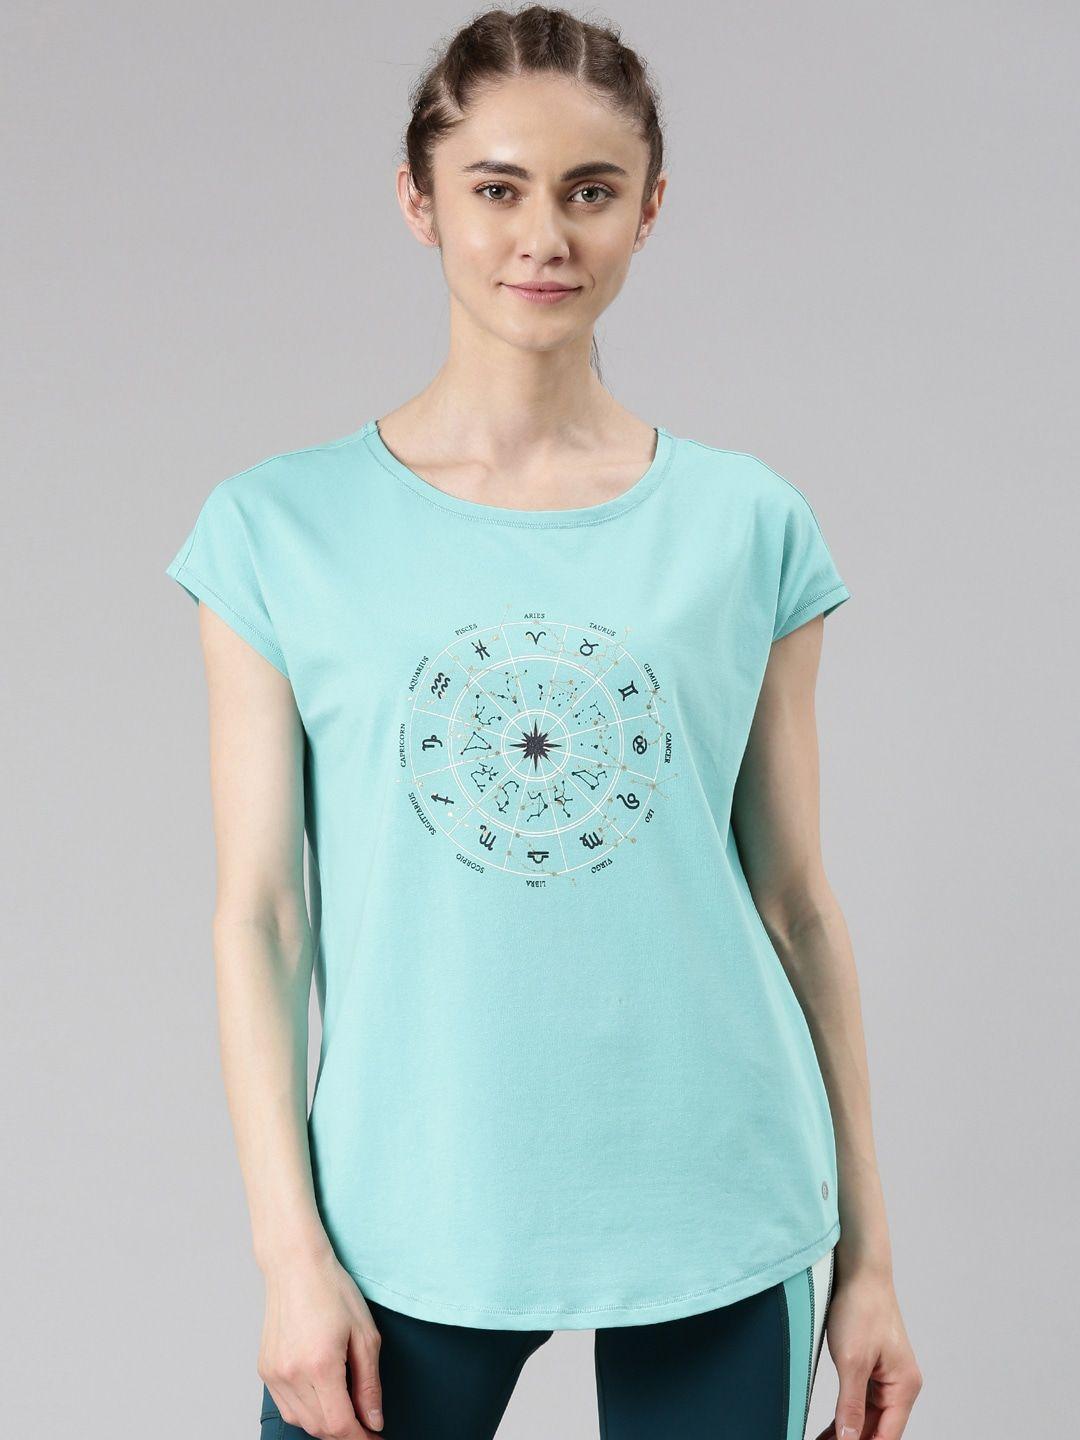 enamor graphic printed extended sleeves antimicrobial meditate t-shirt